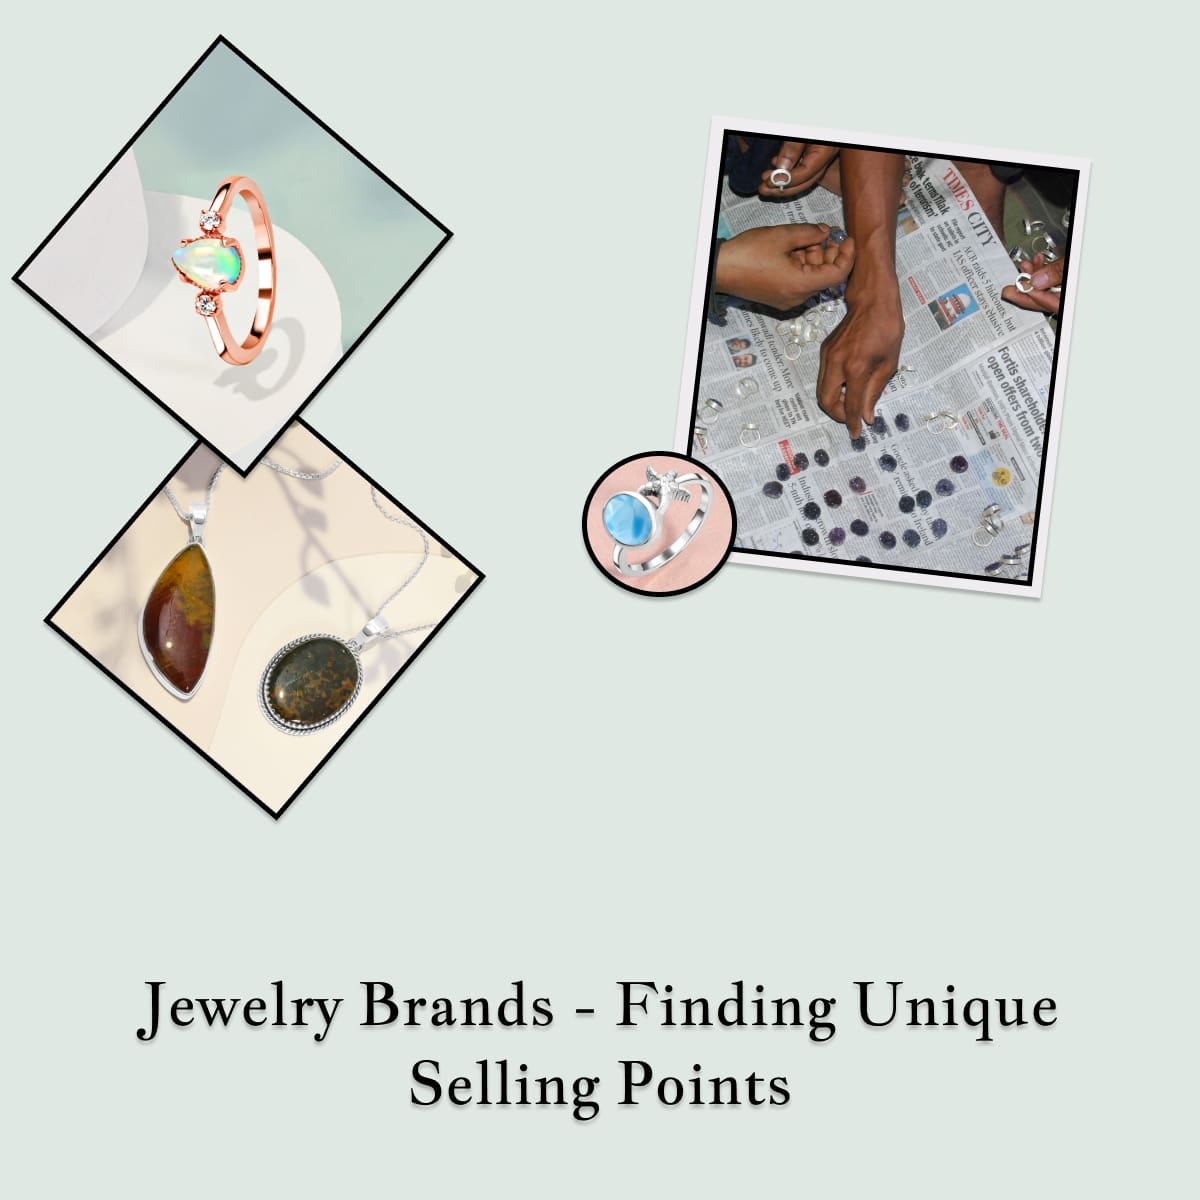 Why do Jewelry Brands need Unique Selling Points